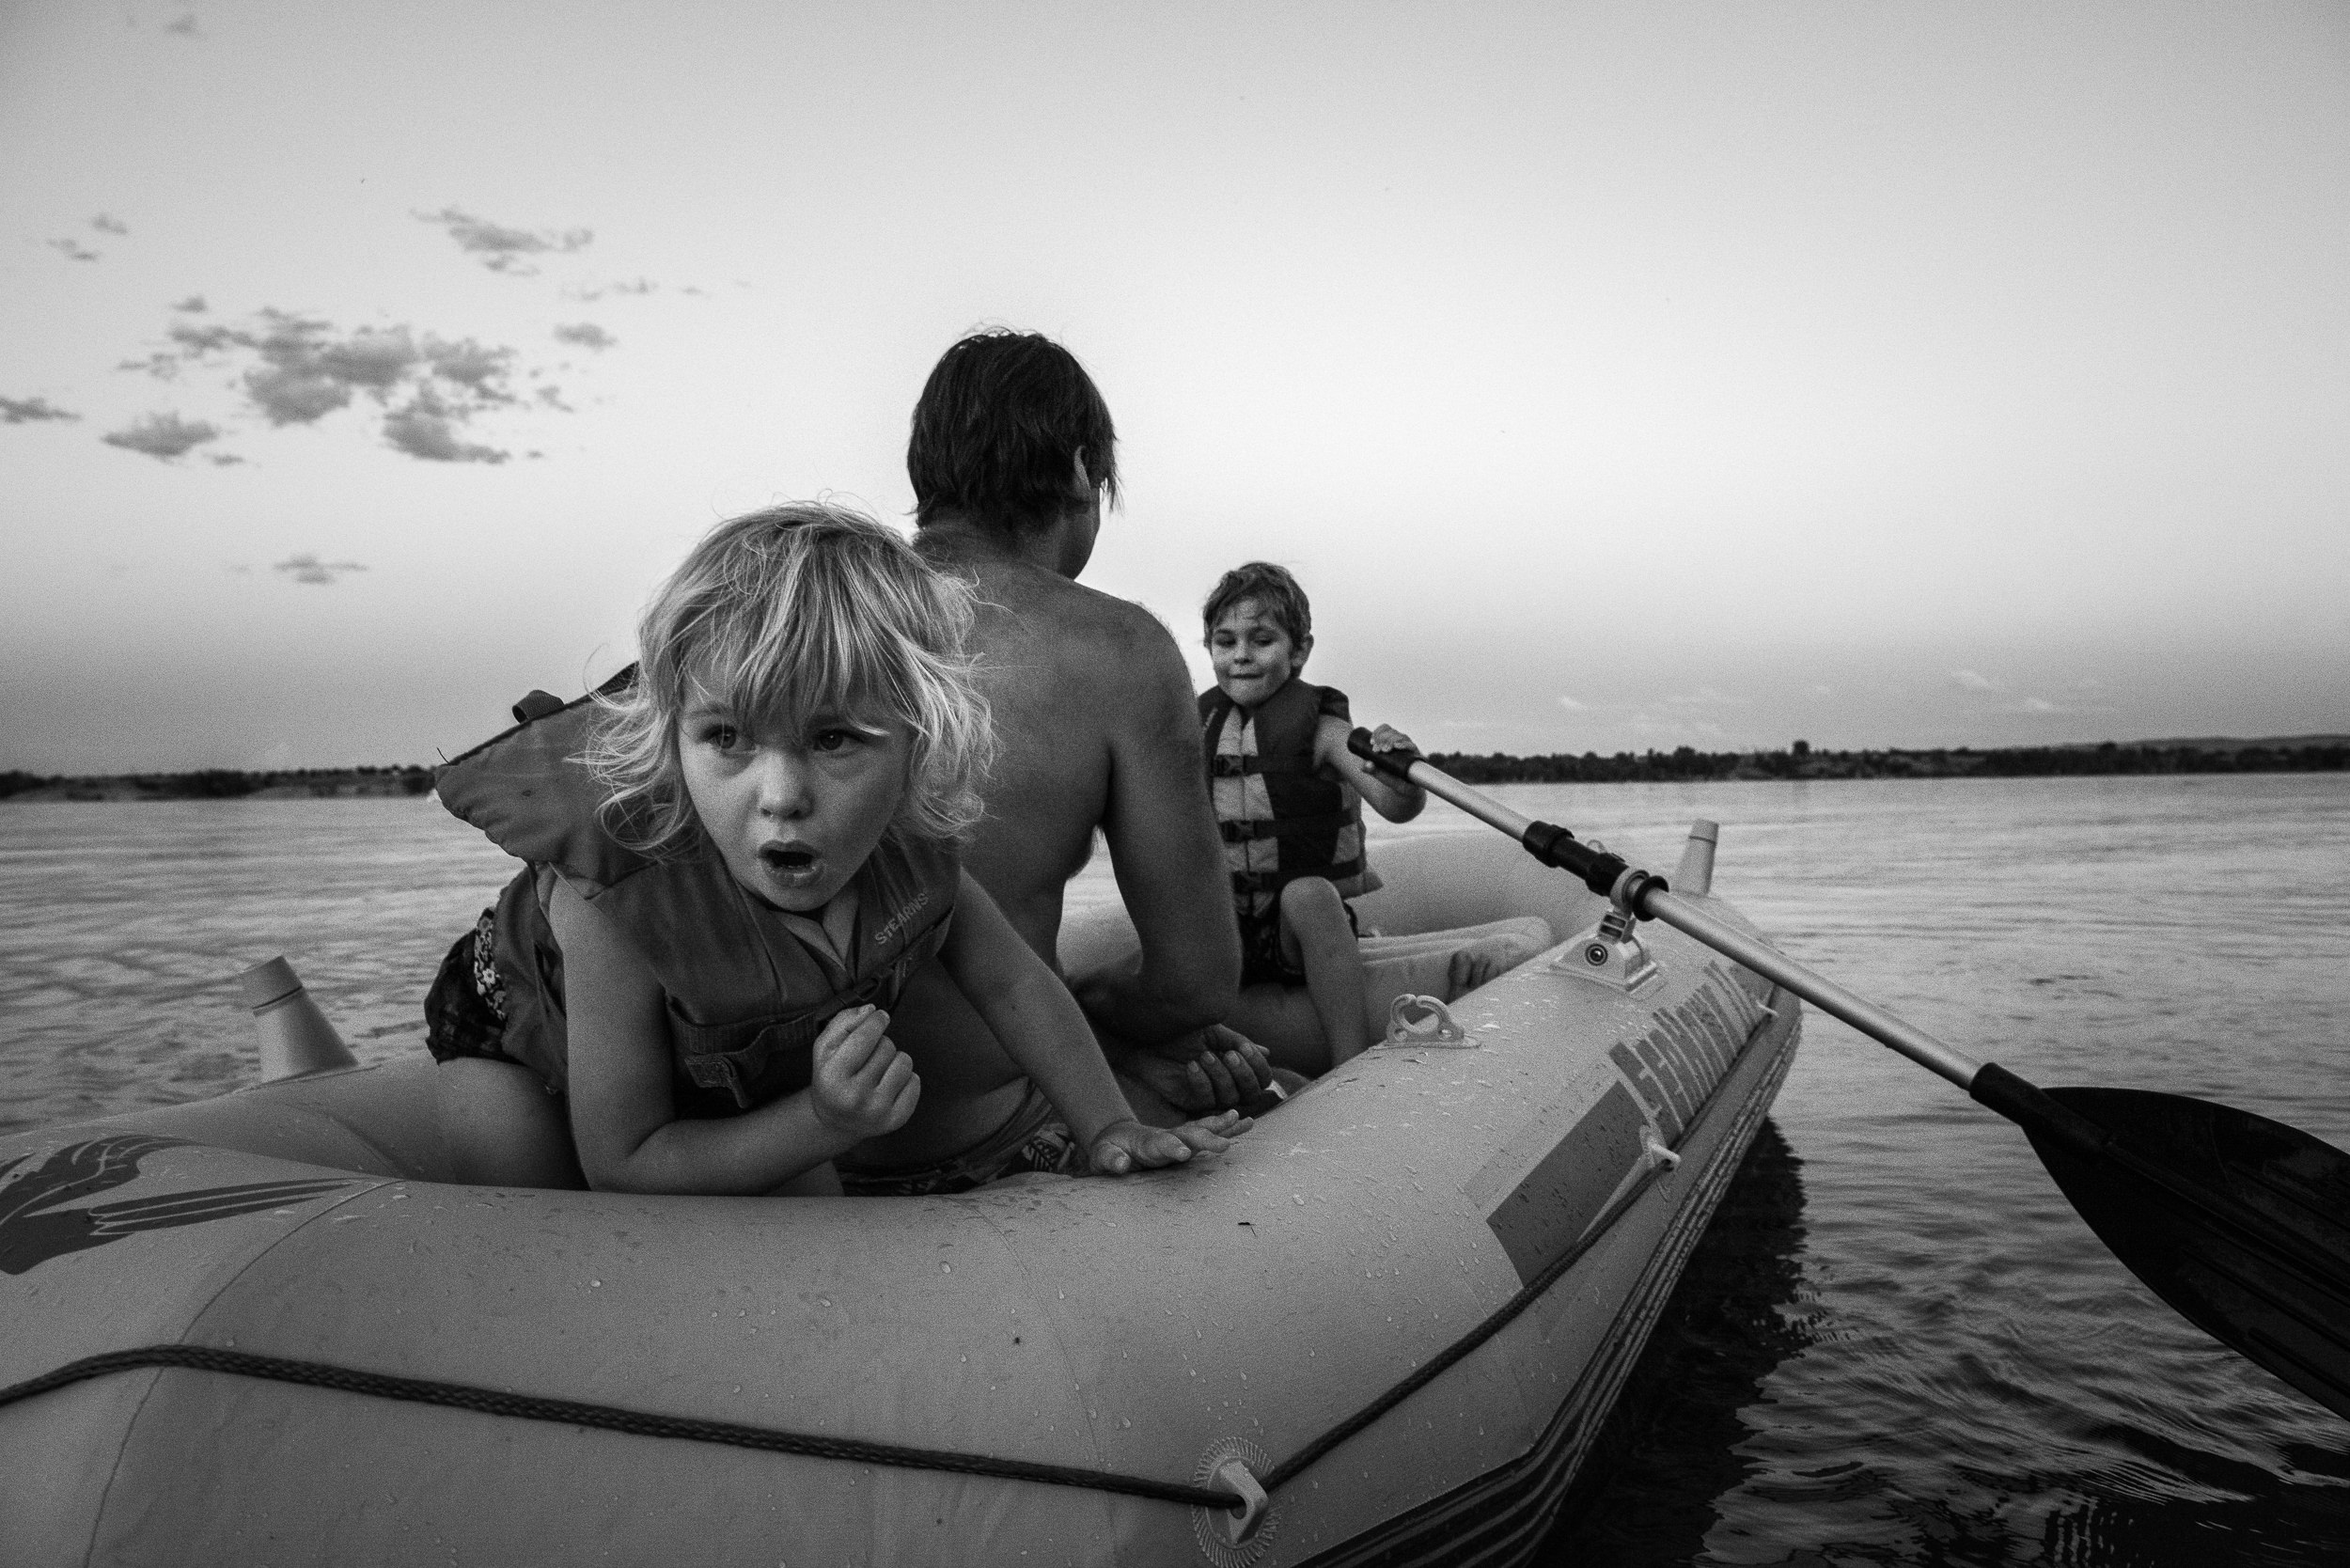 Blog - The Pen & Camera - Molly Rees Photo - Black and White Documentary Childhood Photography - children in raft at Chatfield Reservoir in Denver, Colorado by M. Menschel